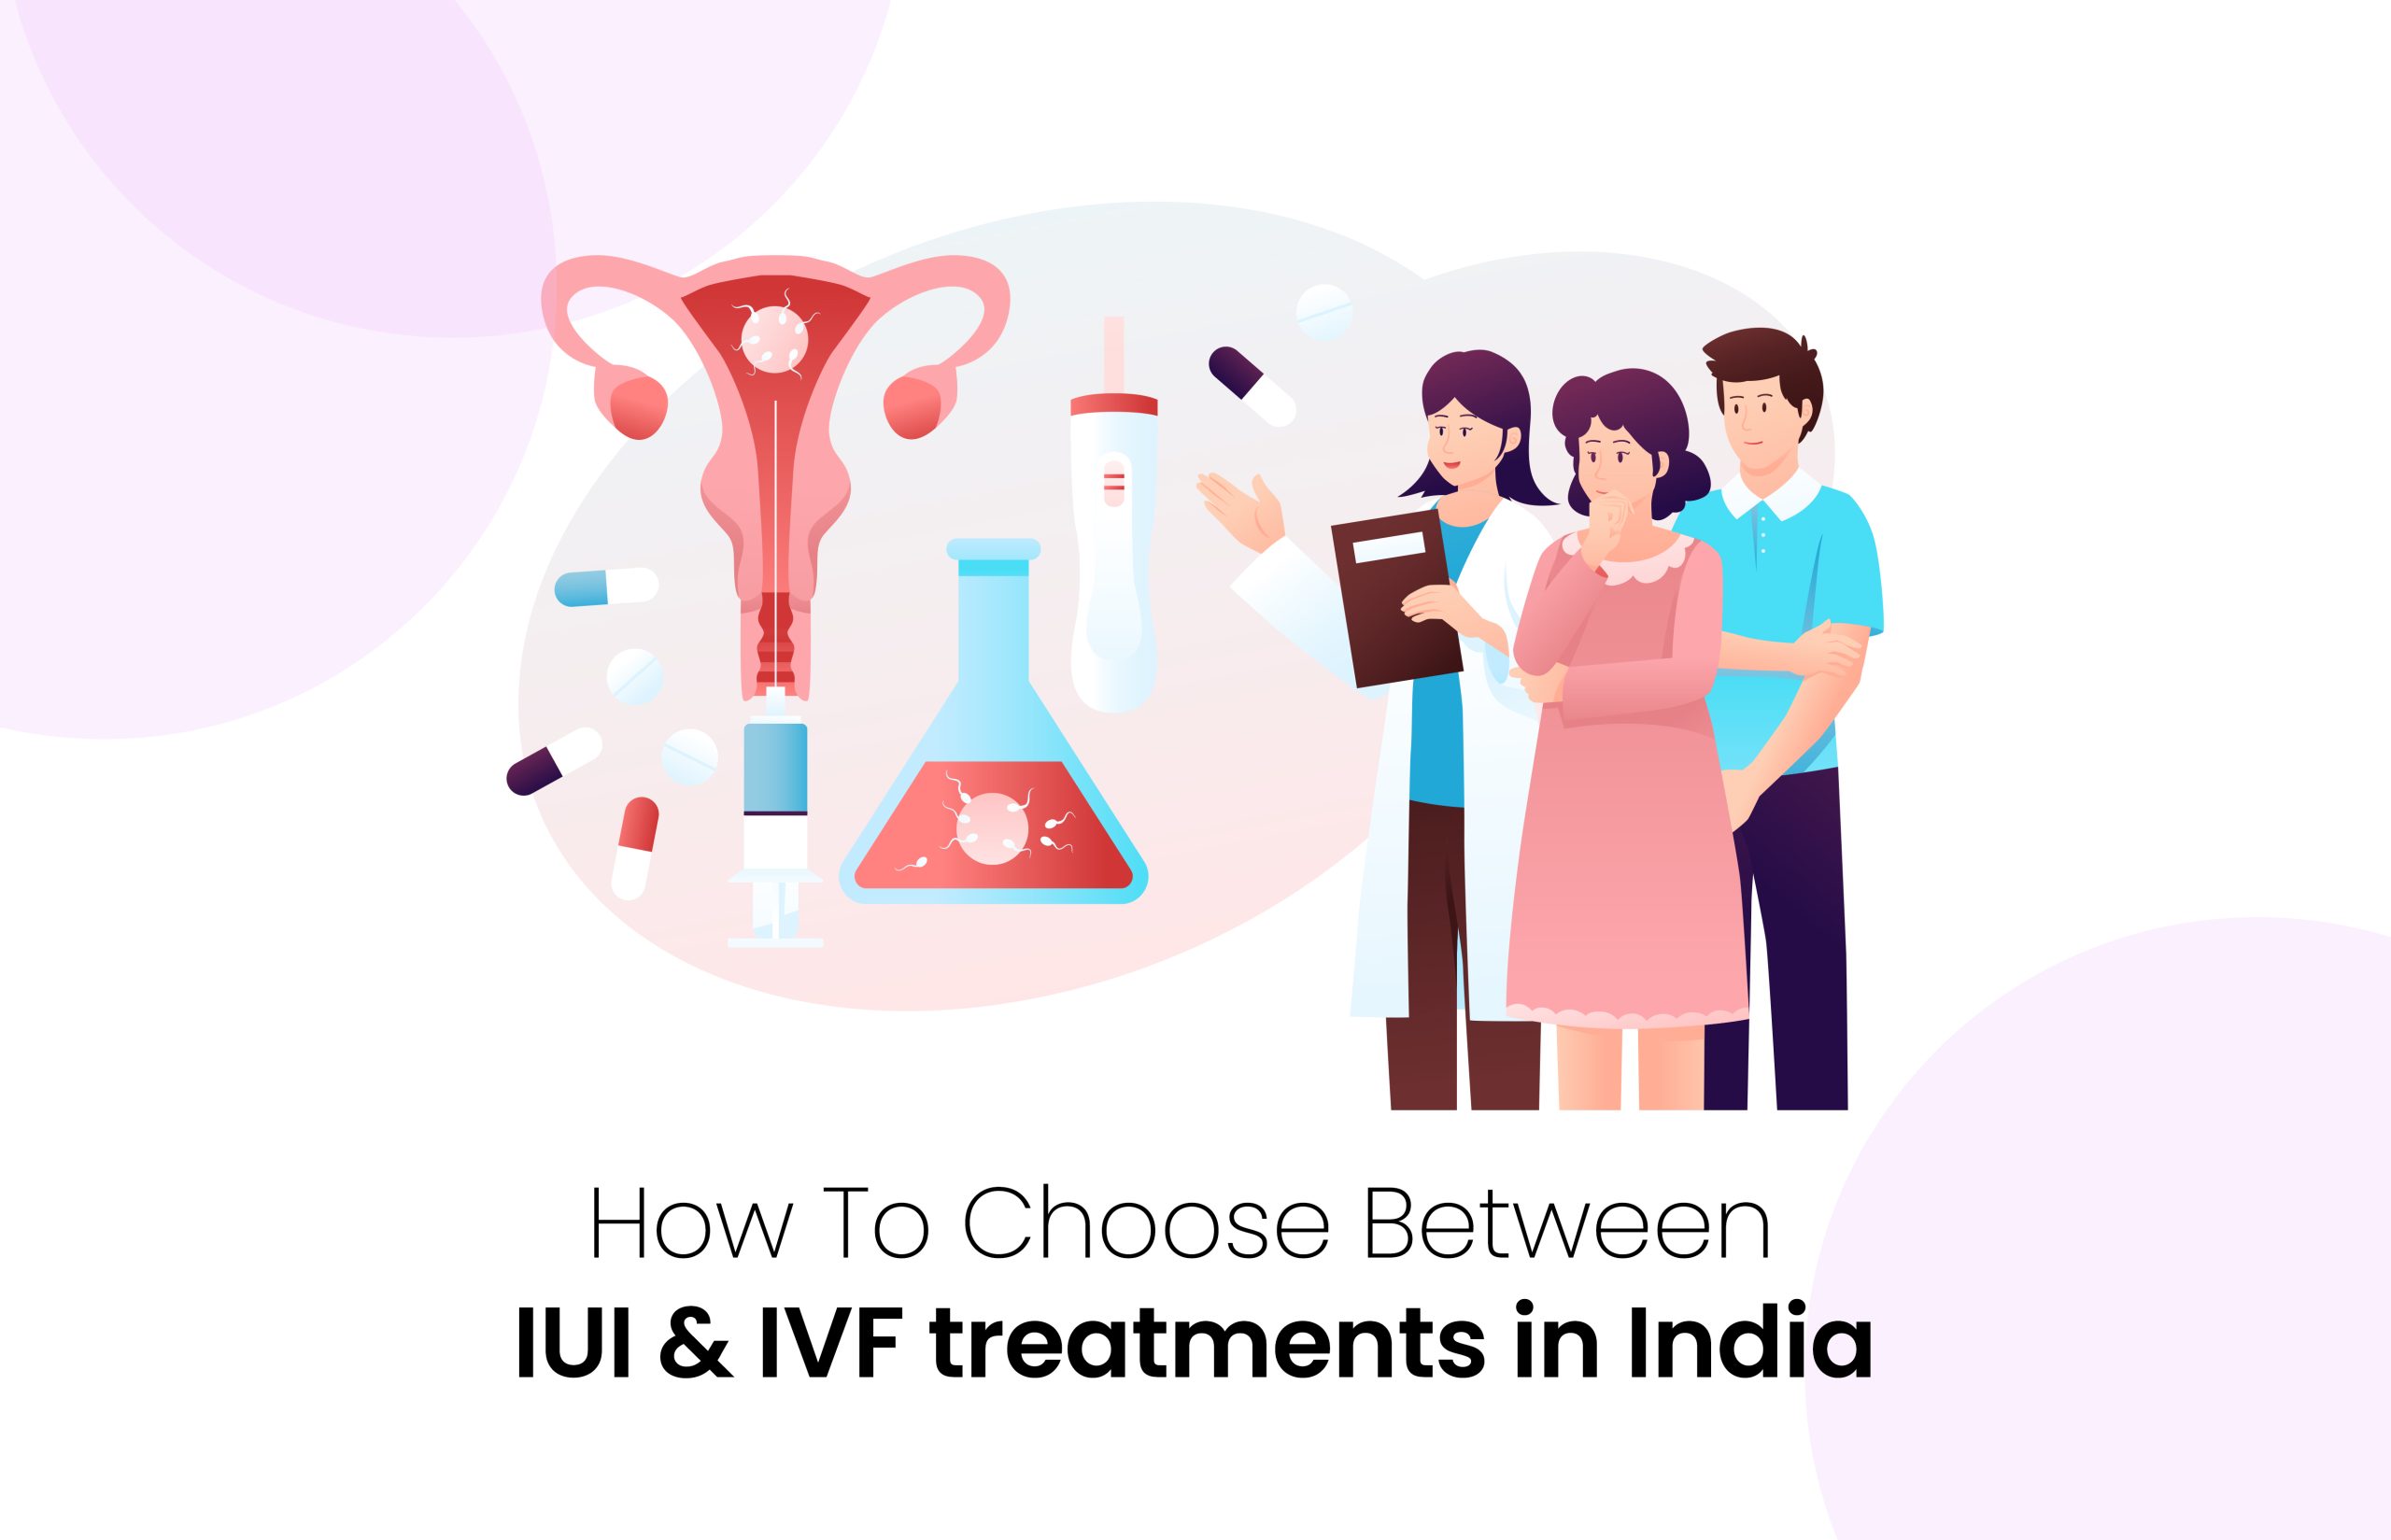 How To Choose Between IUI & IVF Treatments in India? - Oasis Fertility